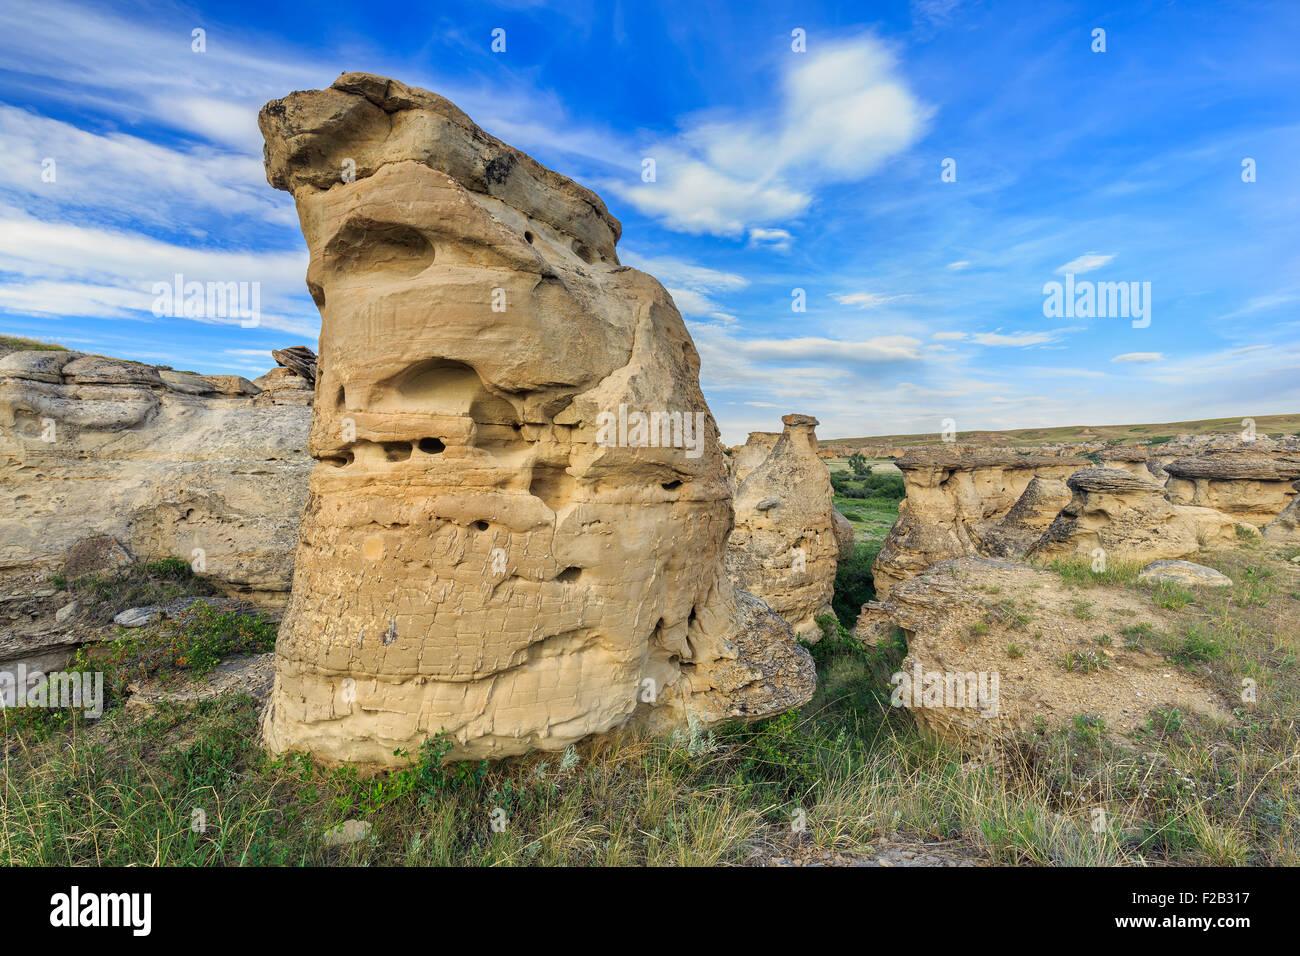 Hoodoos in the Badlands of the Milk River Valley, Writing-on-Stone Provincial Park, Alberta, Canada. Stock Photo